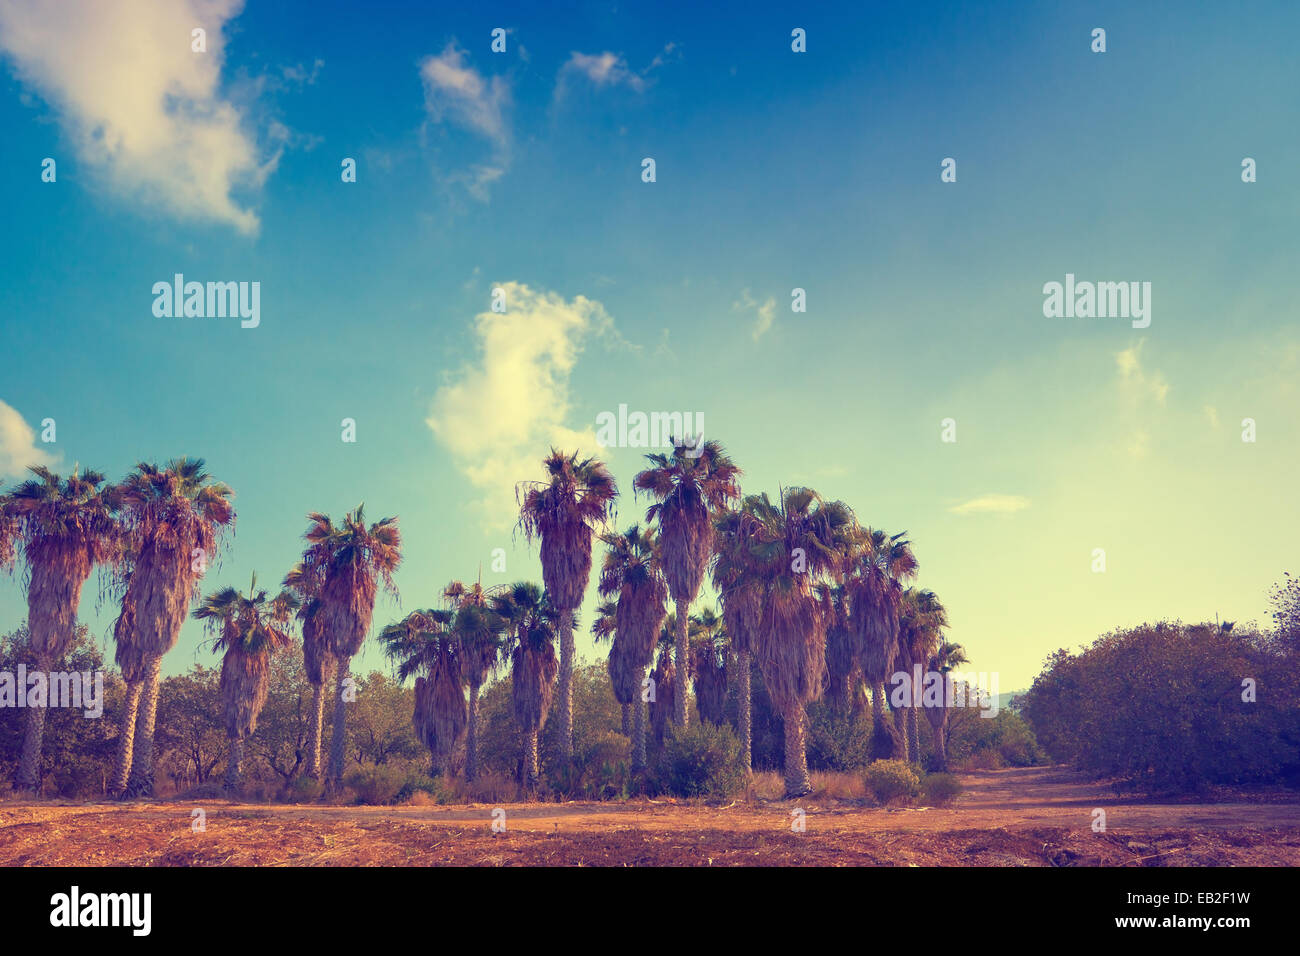 Date palm trees against blue sky Stock Photo